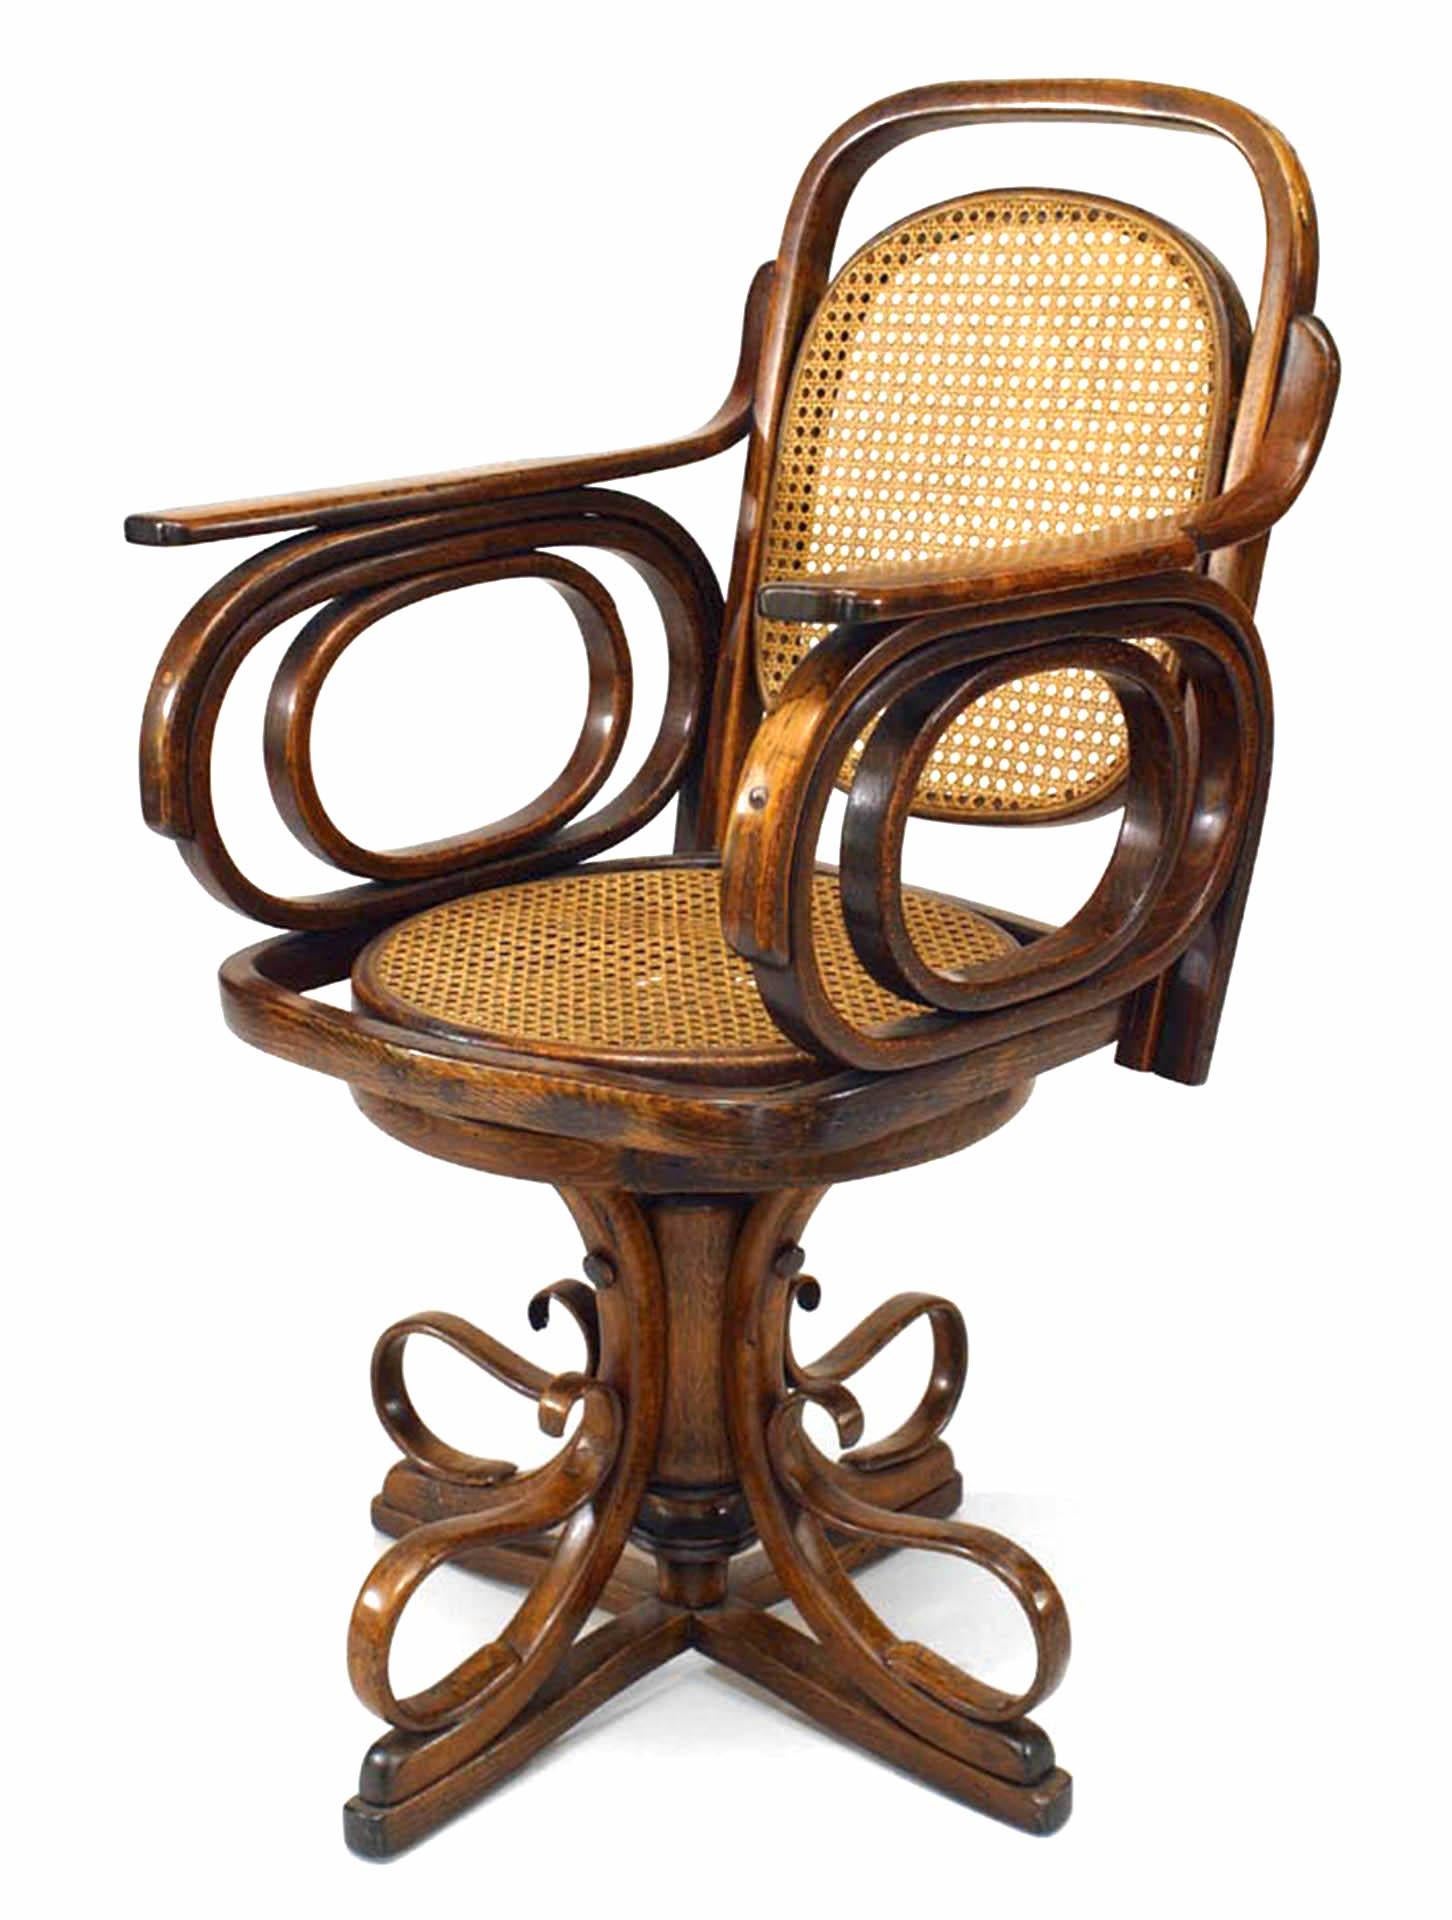 Austrian Bentwood (19/20th Century) swivel chair with scroll pedestal base and caned seat and back with oval open arm design. (att: THONET)
